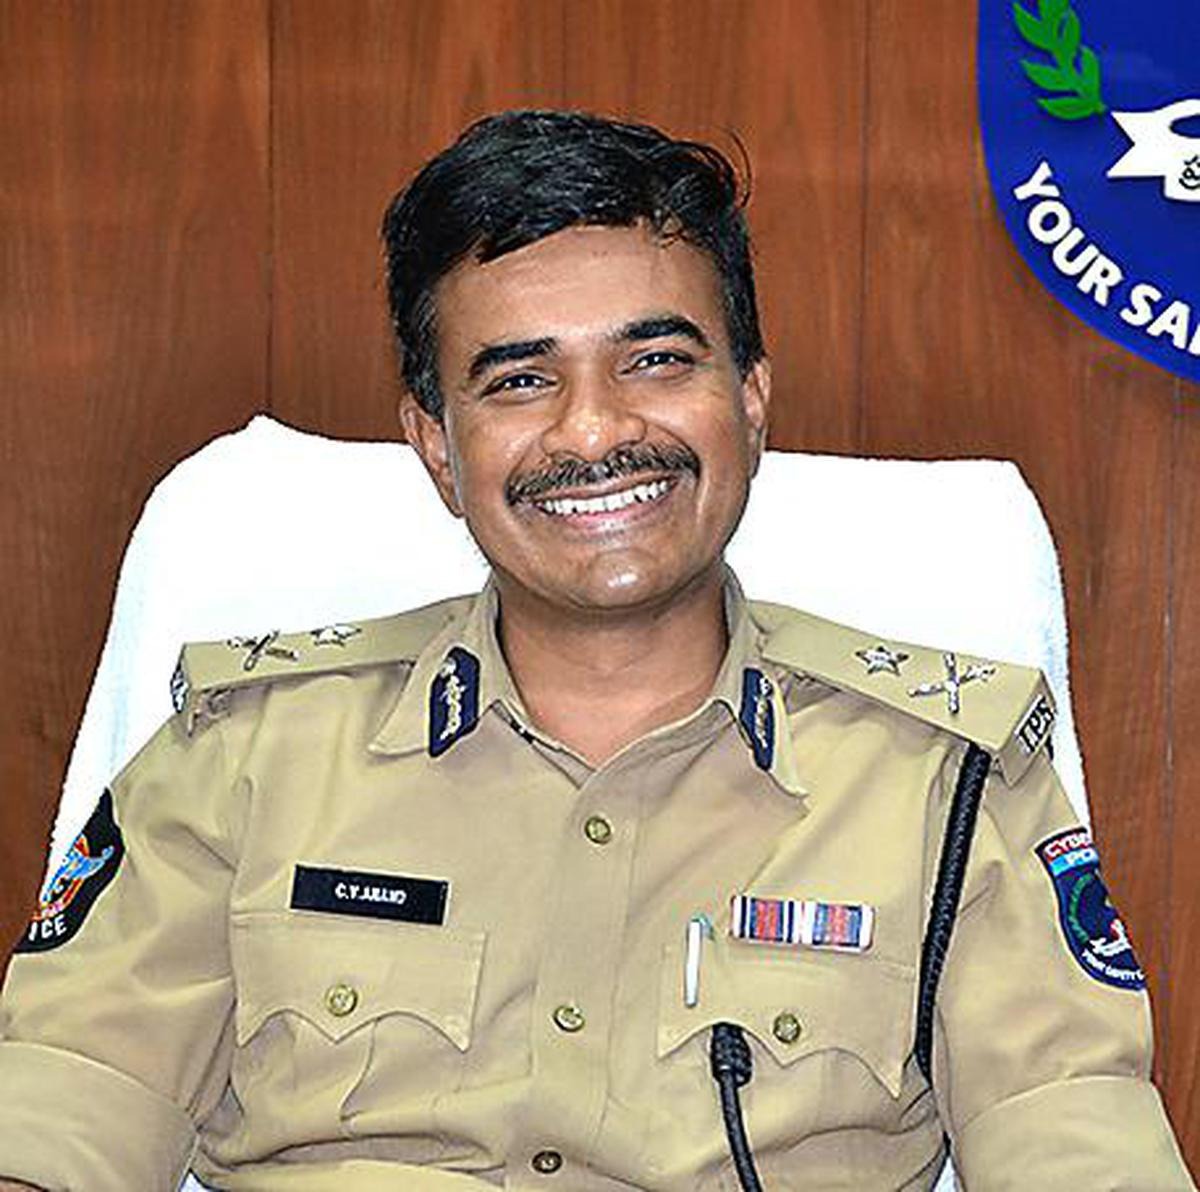 CV Anand, IPS, Commissioner of Police, Hyderabad